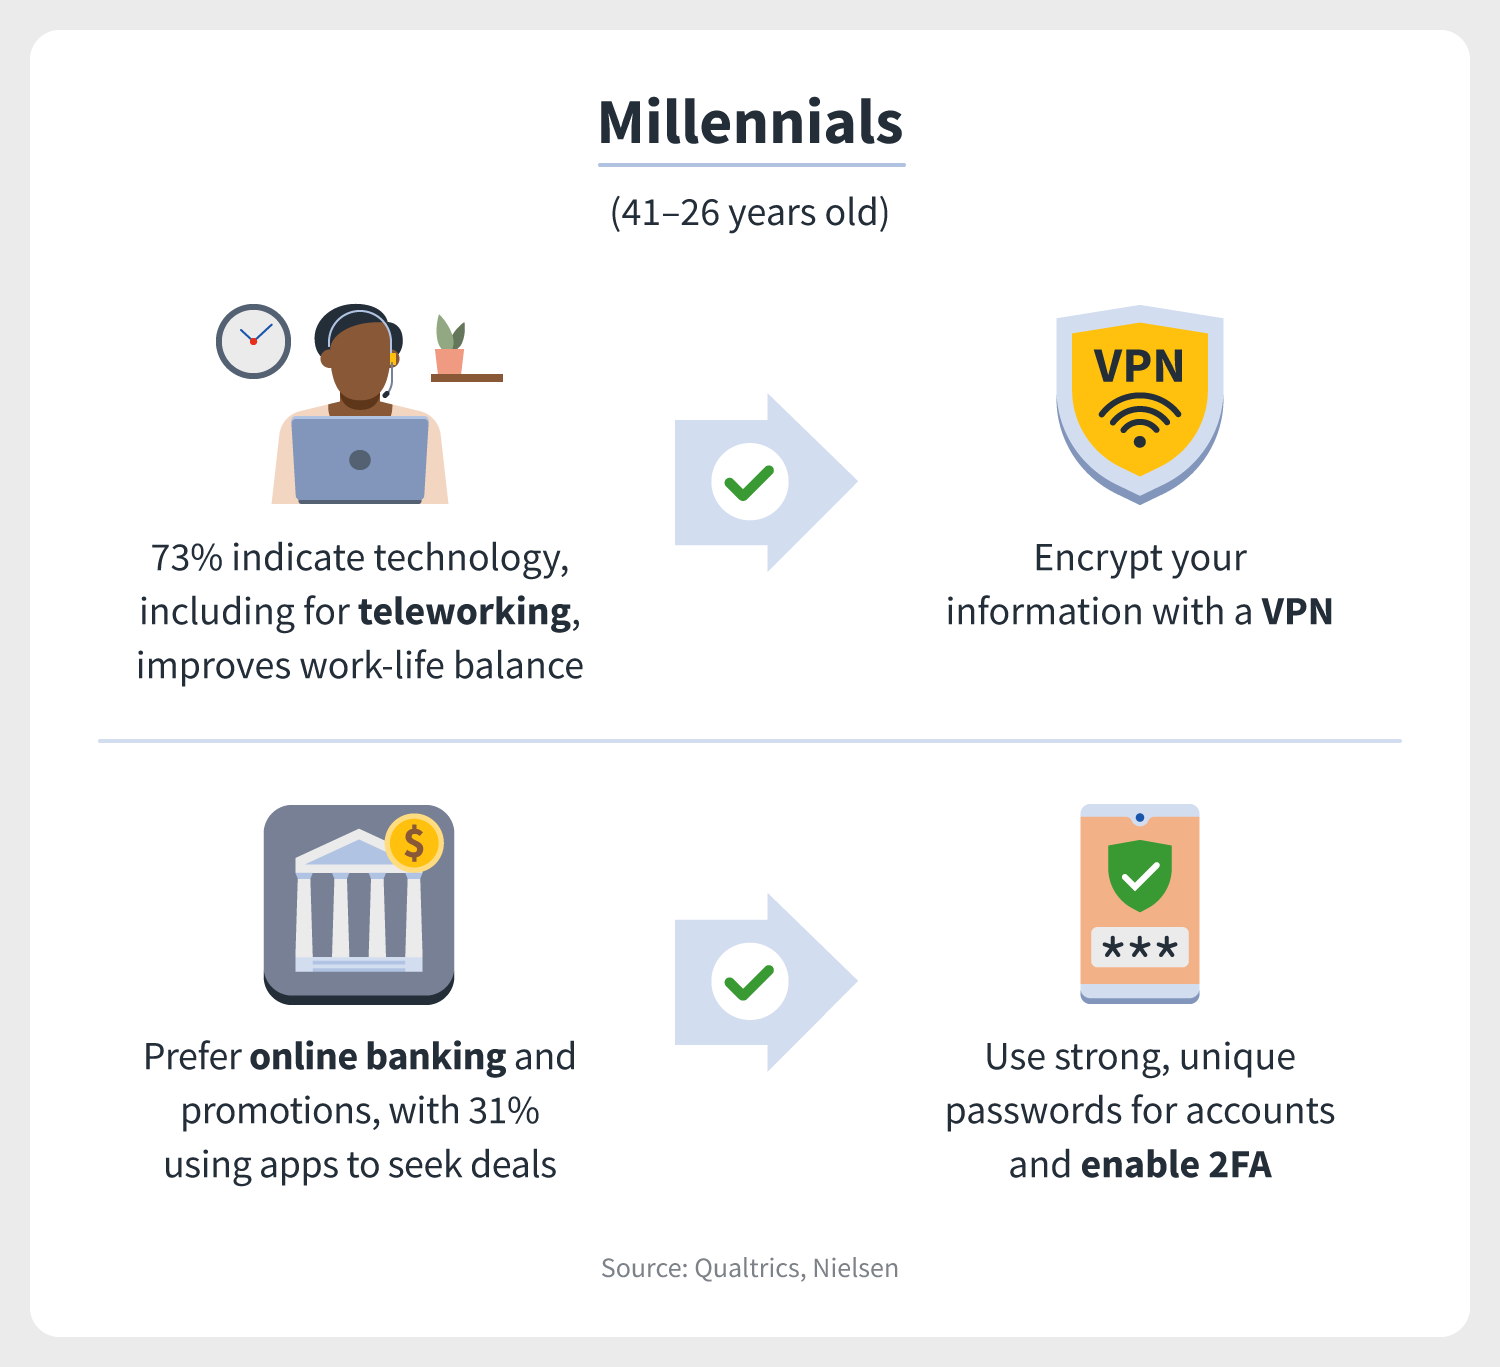 a teleworker and an online banking institution indicate that the digital generation Millennials prefer these types of technology most and that they should level up their cybersecurity when using them